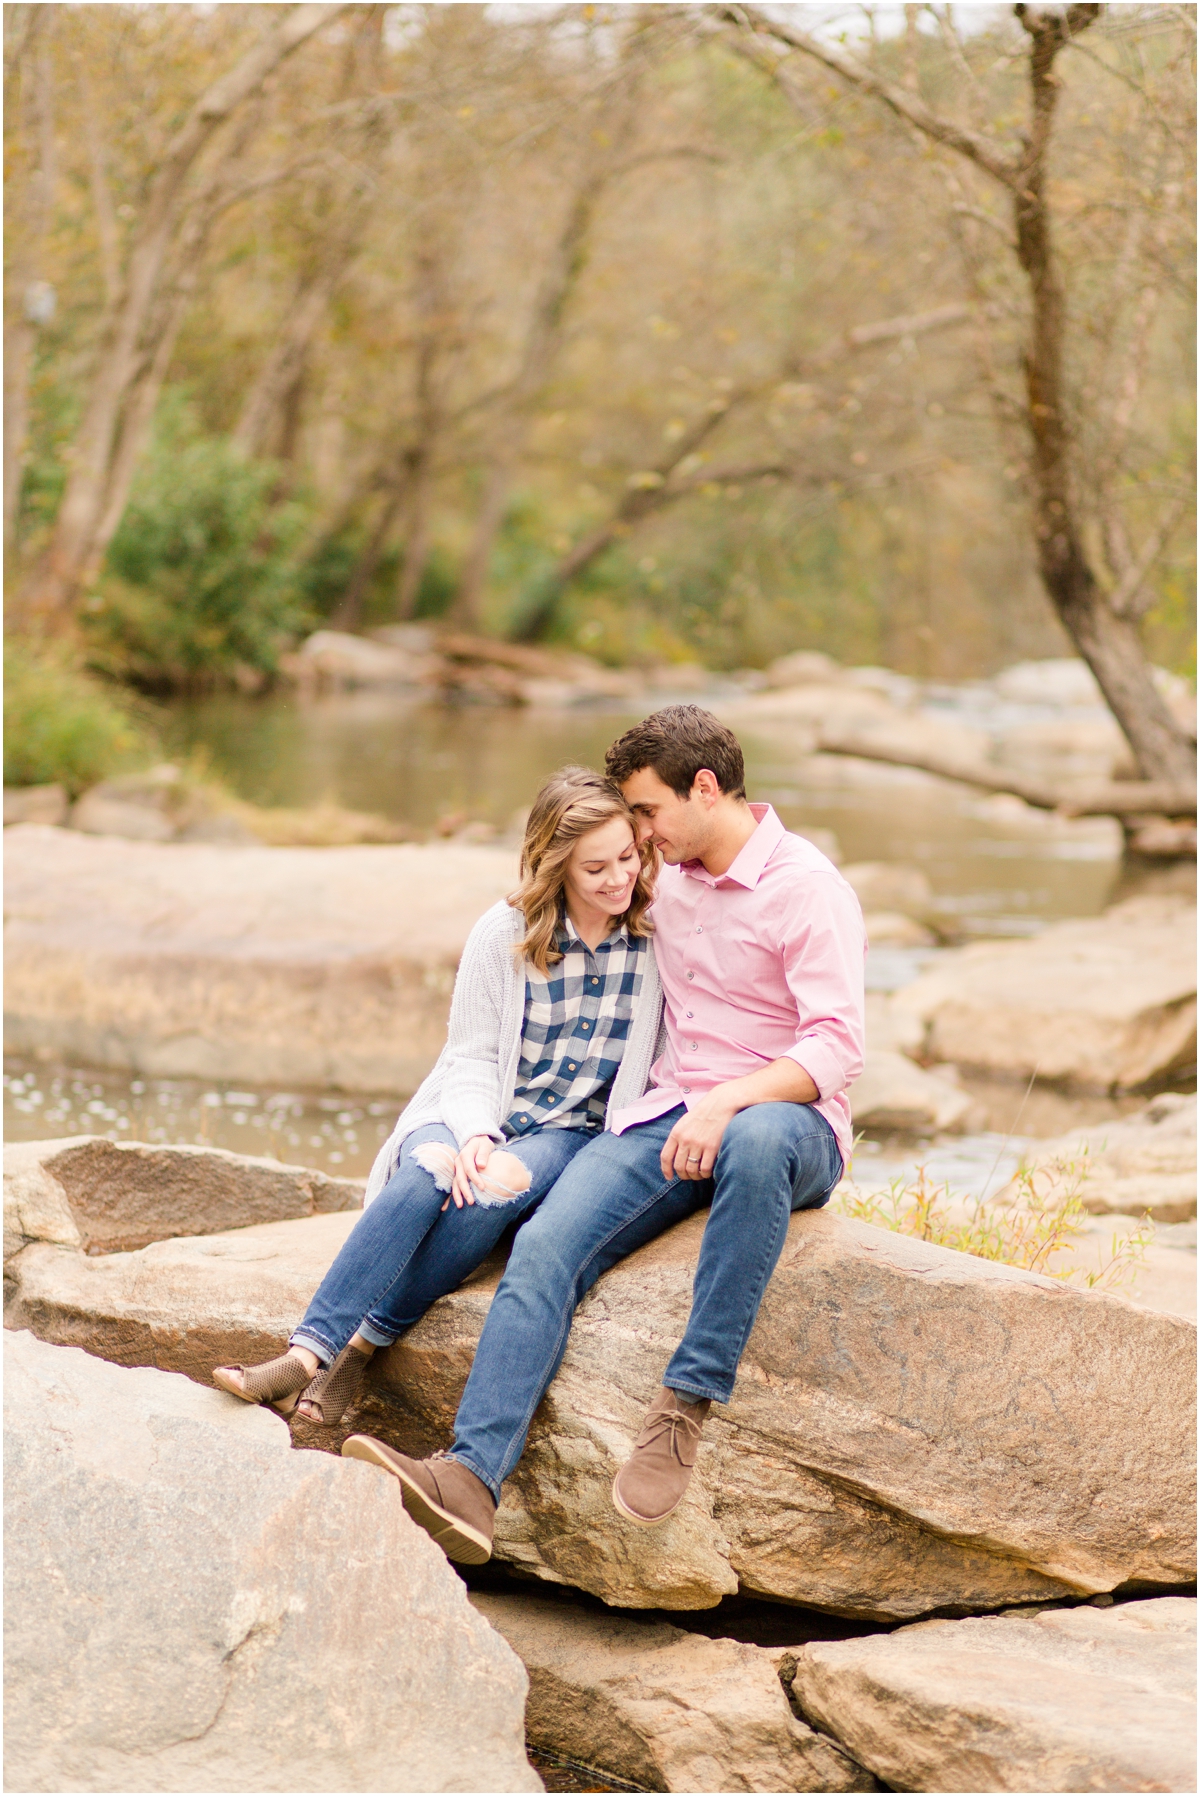 Rustic Fall Married Couples Session in Spartanburg, SC at Glendale Shoals l Sprinkle Photography